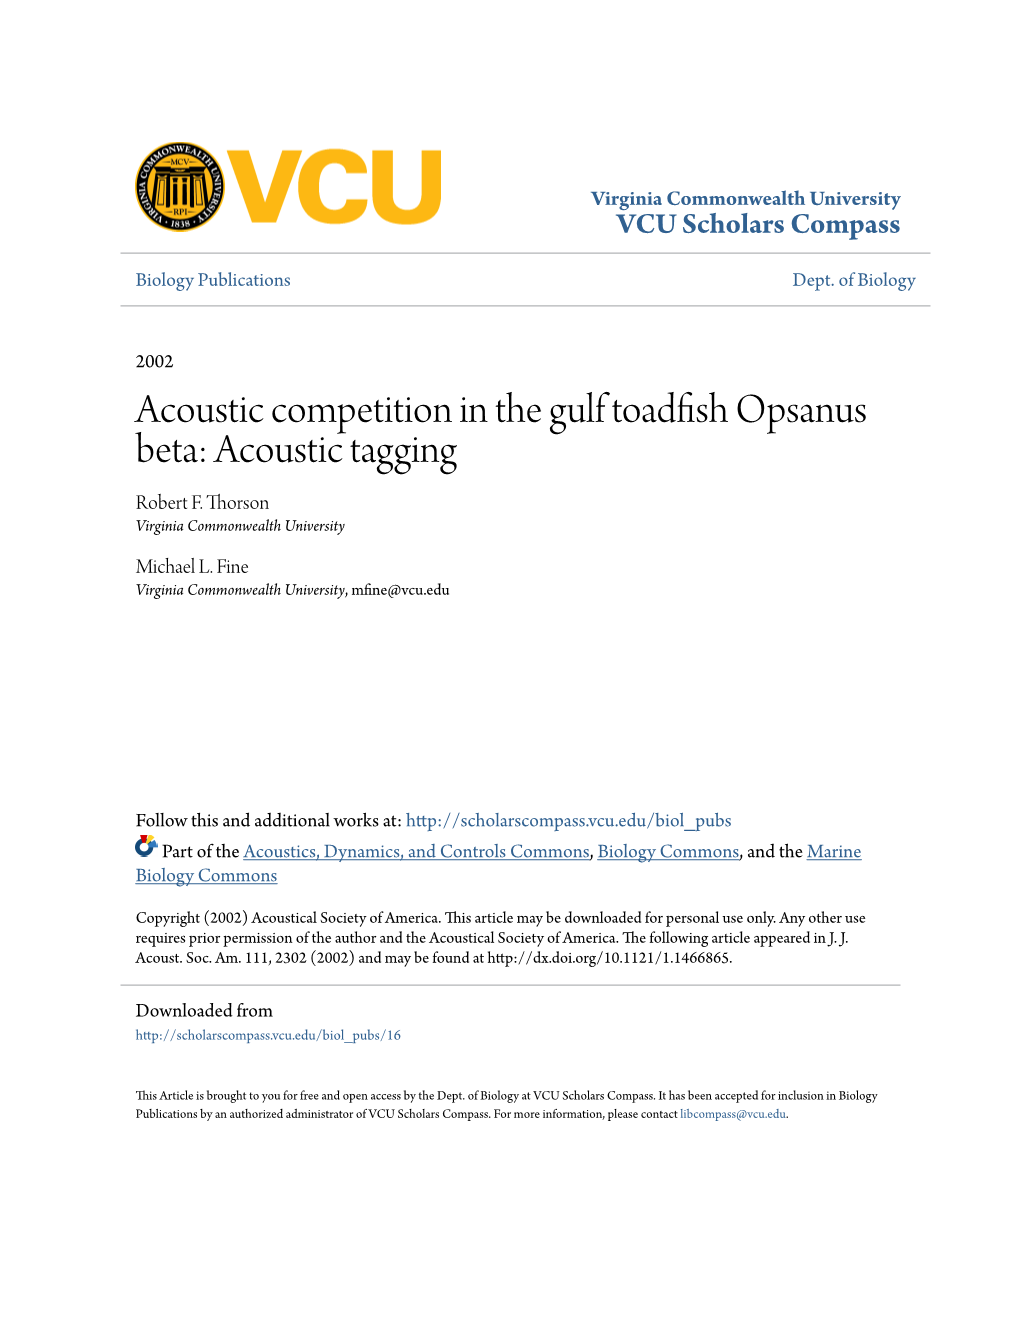 Acoustic Competition in the Gulf Toadfish Opsanus Beta: Acoustic Tagging Robert F